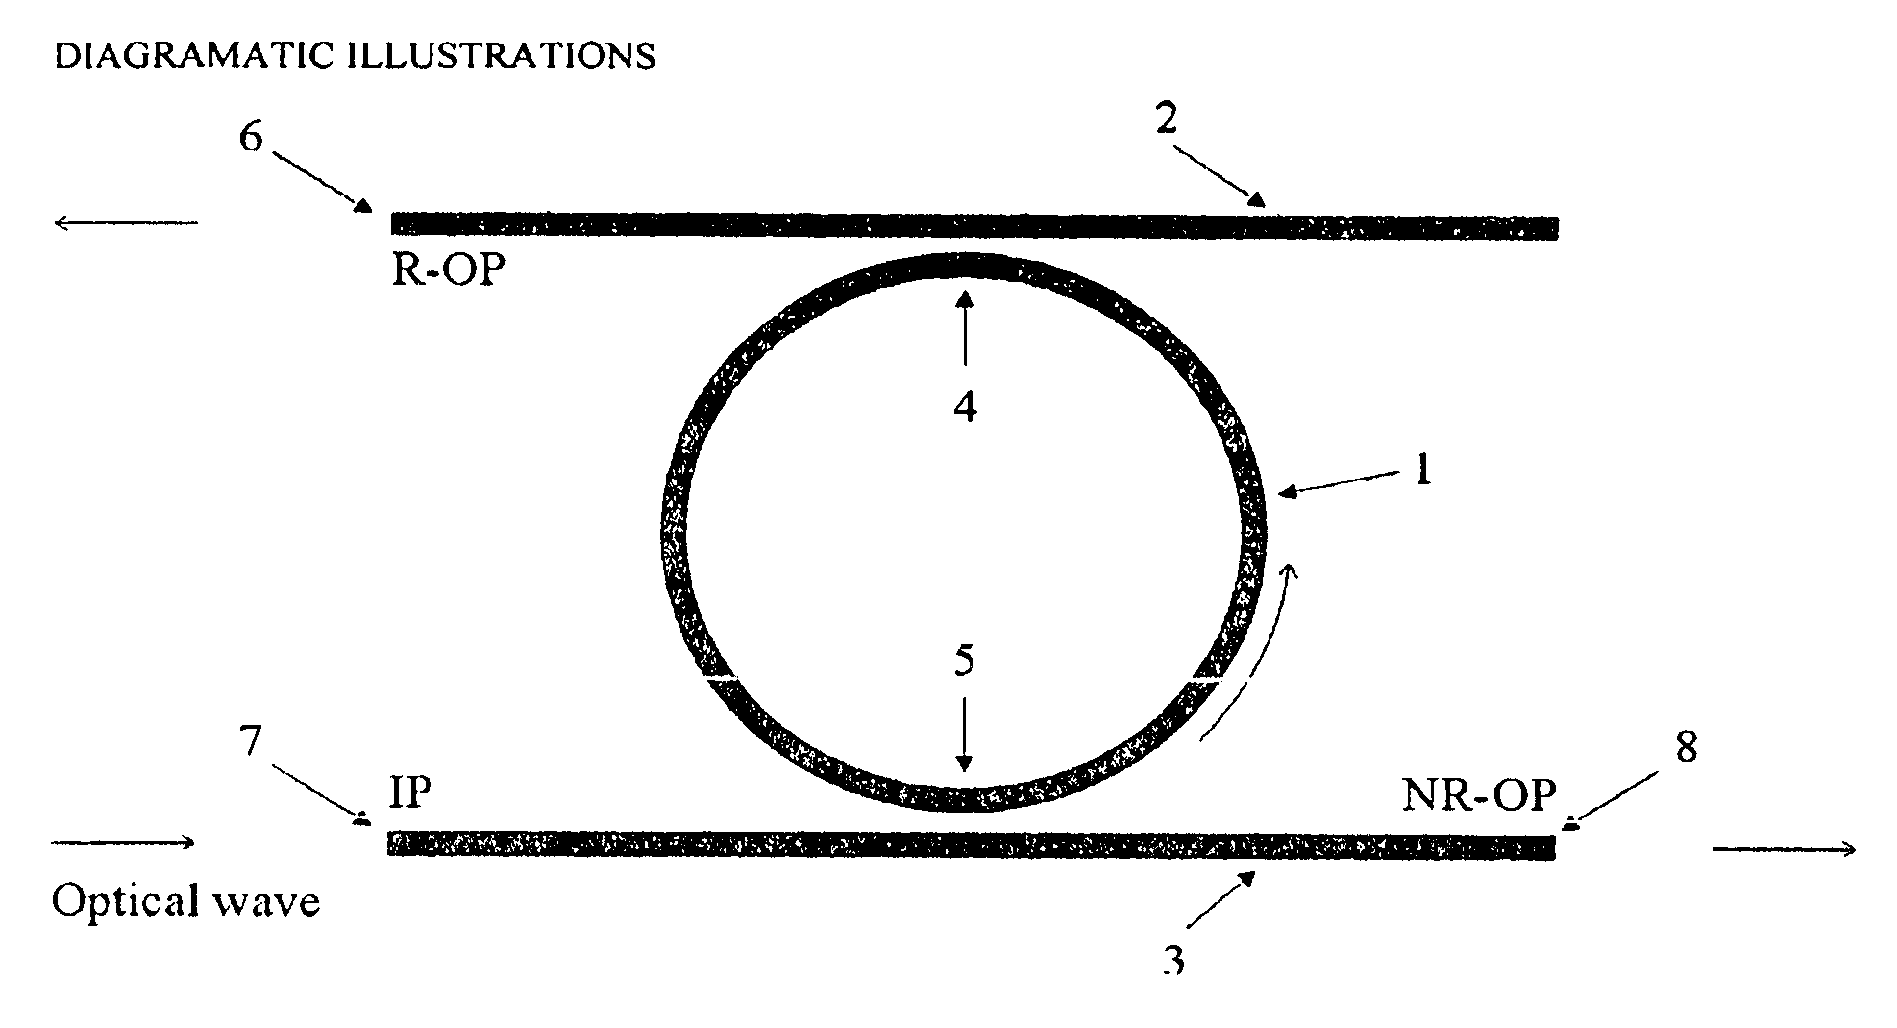 Method of implementing the kerr effect in an integrated ring resonator (the kerr integrated optical ring filter) to achieve all-optical wavelength switching, as well as all-optical tunable filtering, add-and -drop multiplexing, space switching and optical intensity modulation